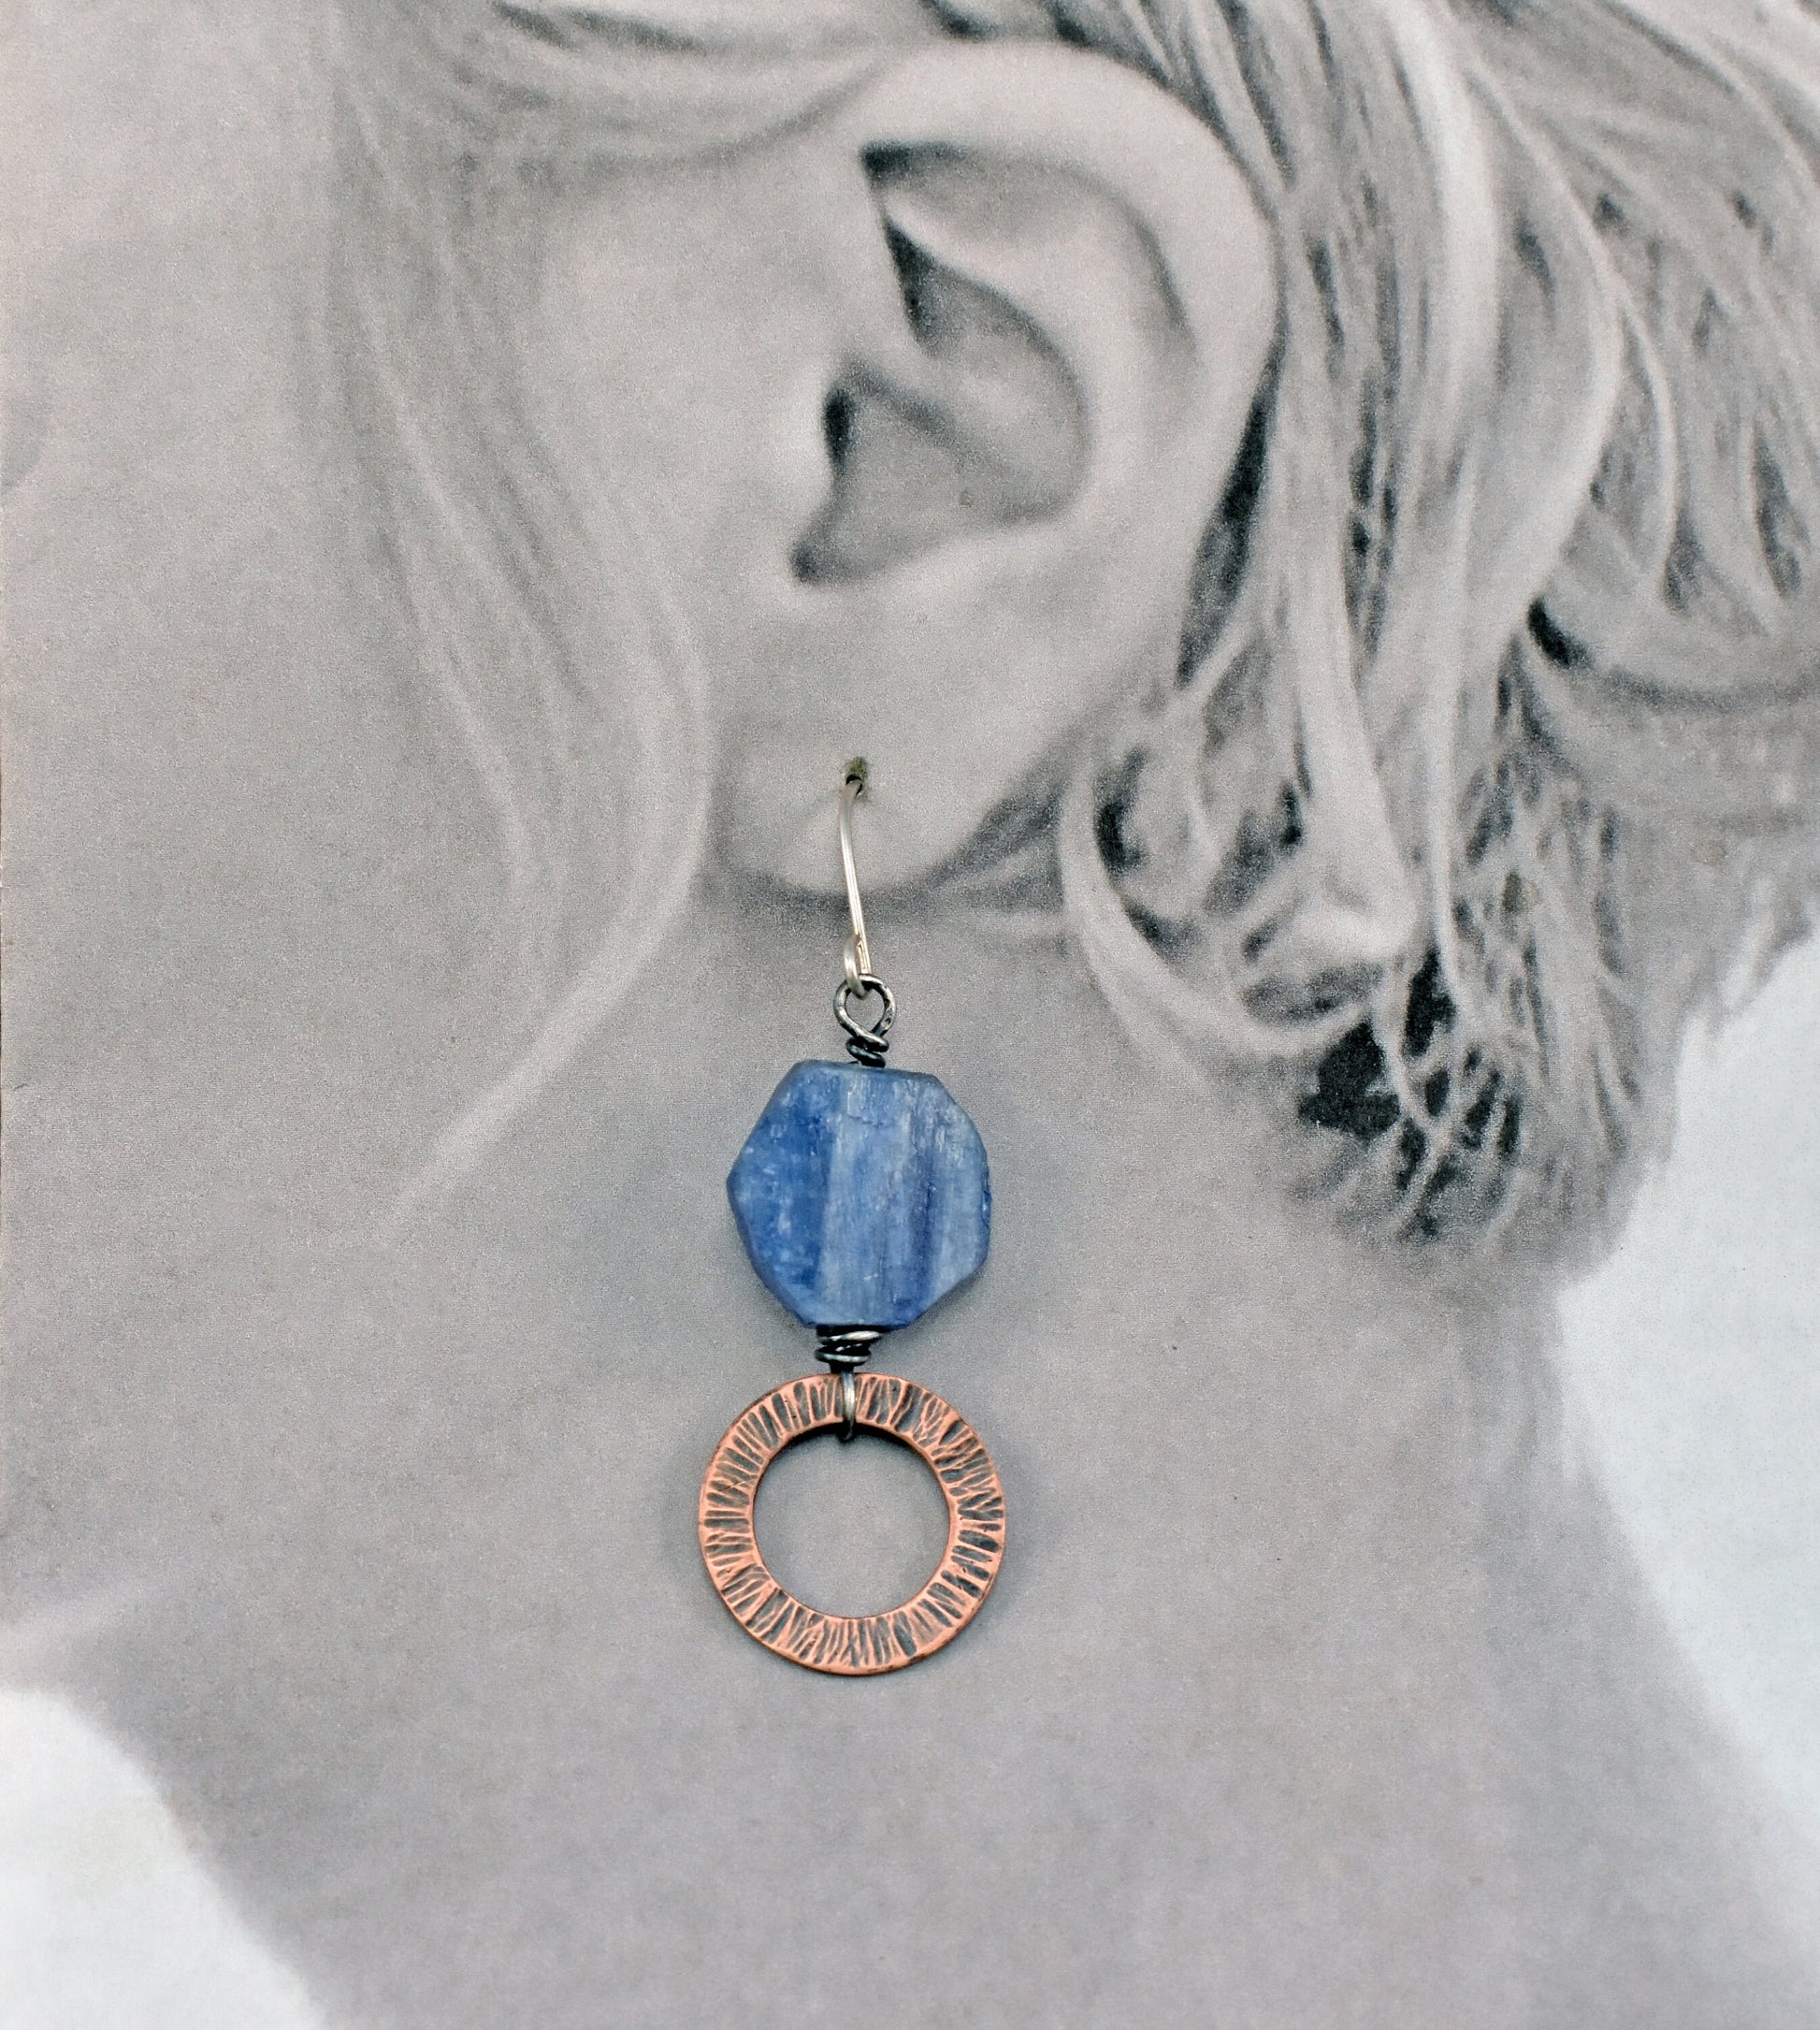 Kyanite Hexagon Earrings Handmade, Rustic Copper Washer Jewelry, Blue Circle Dangles, Mixed Metal, Sterling Silver Wire